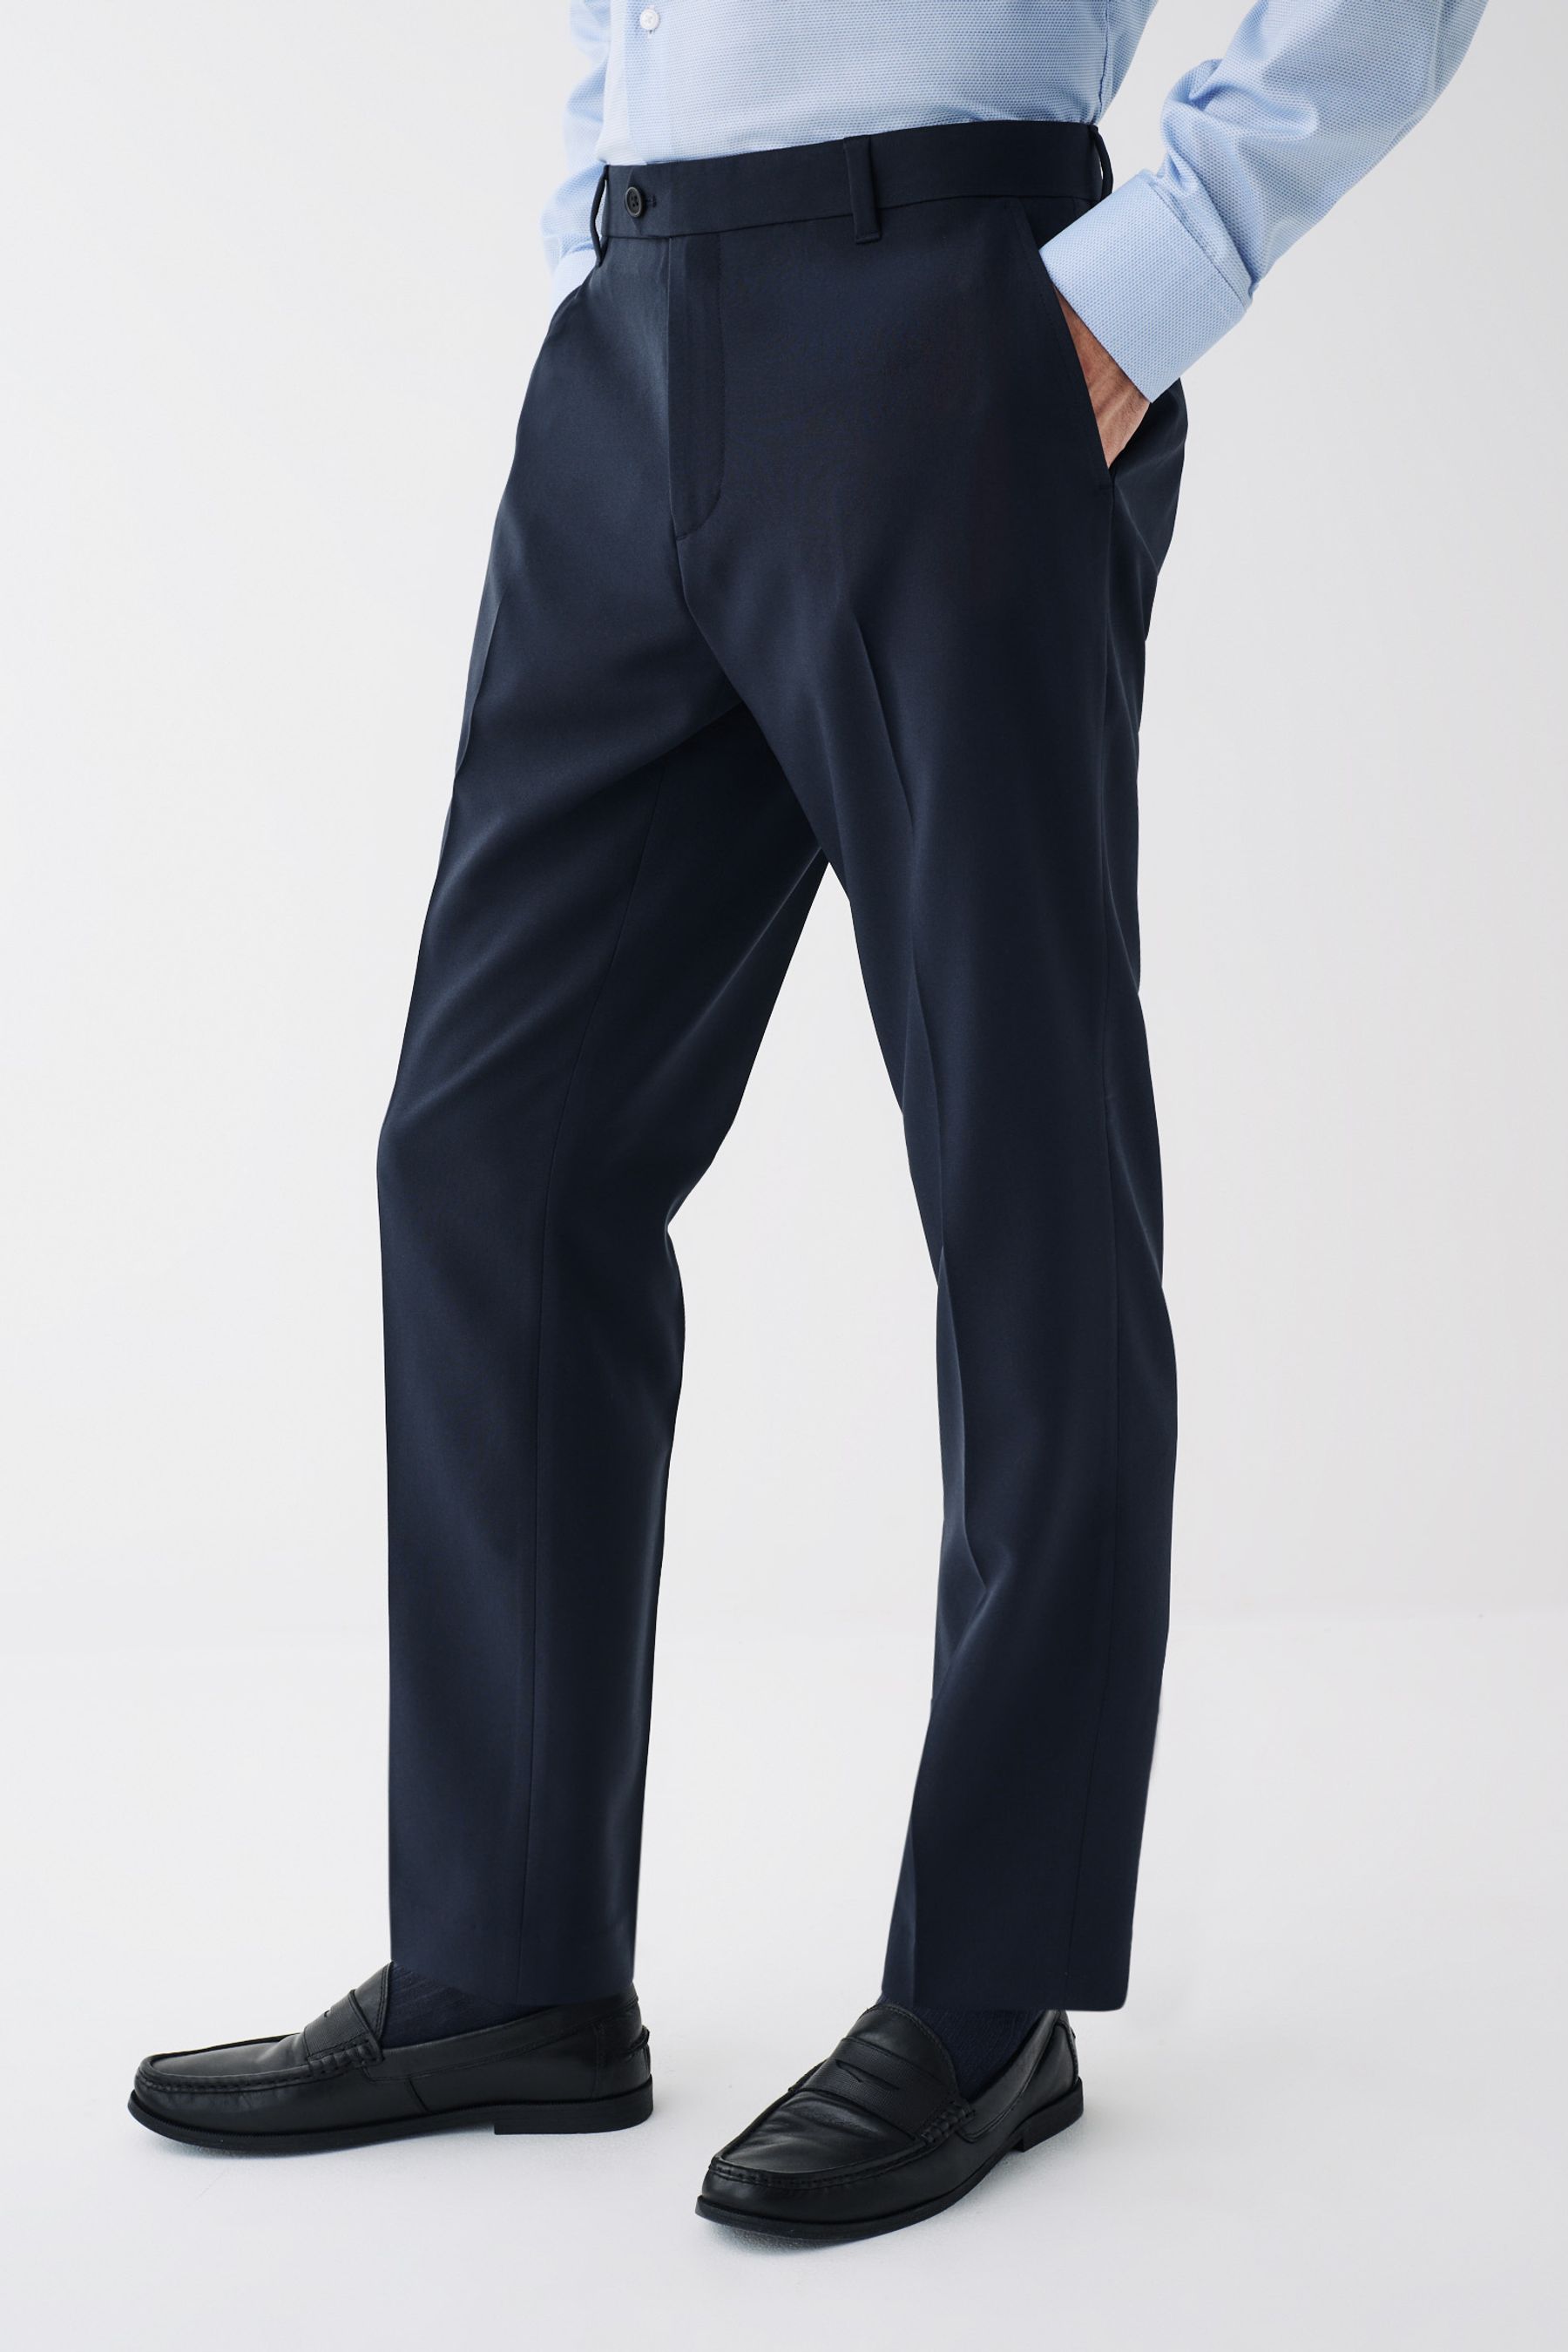 Buy Navy Blue Tailored Machine Washable Plain Front Smart Trousers from ...